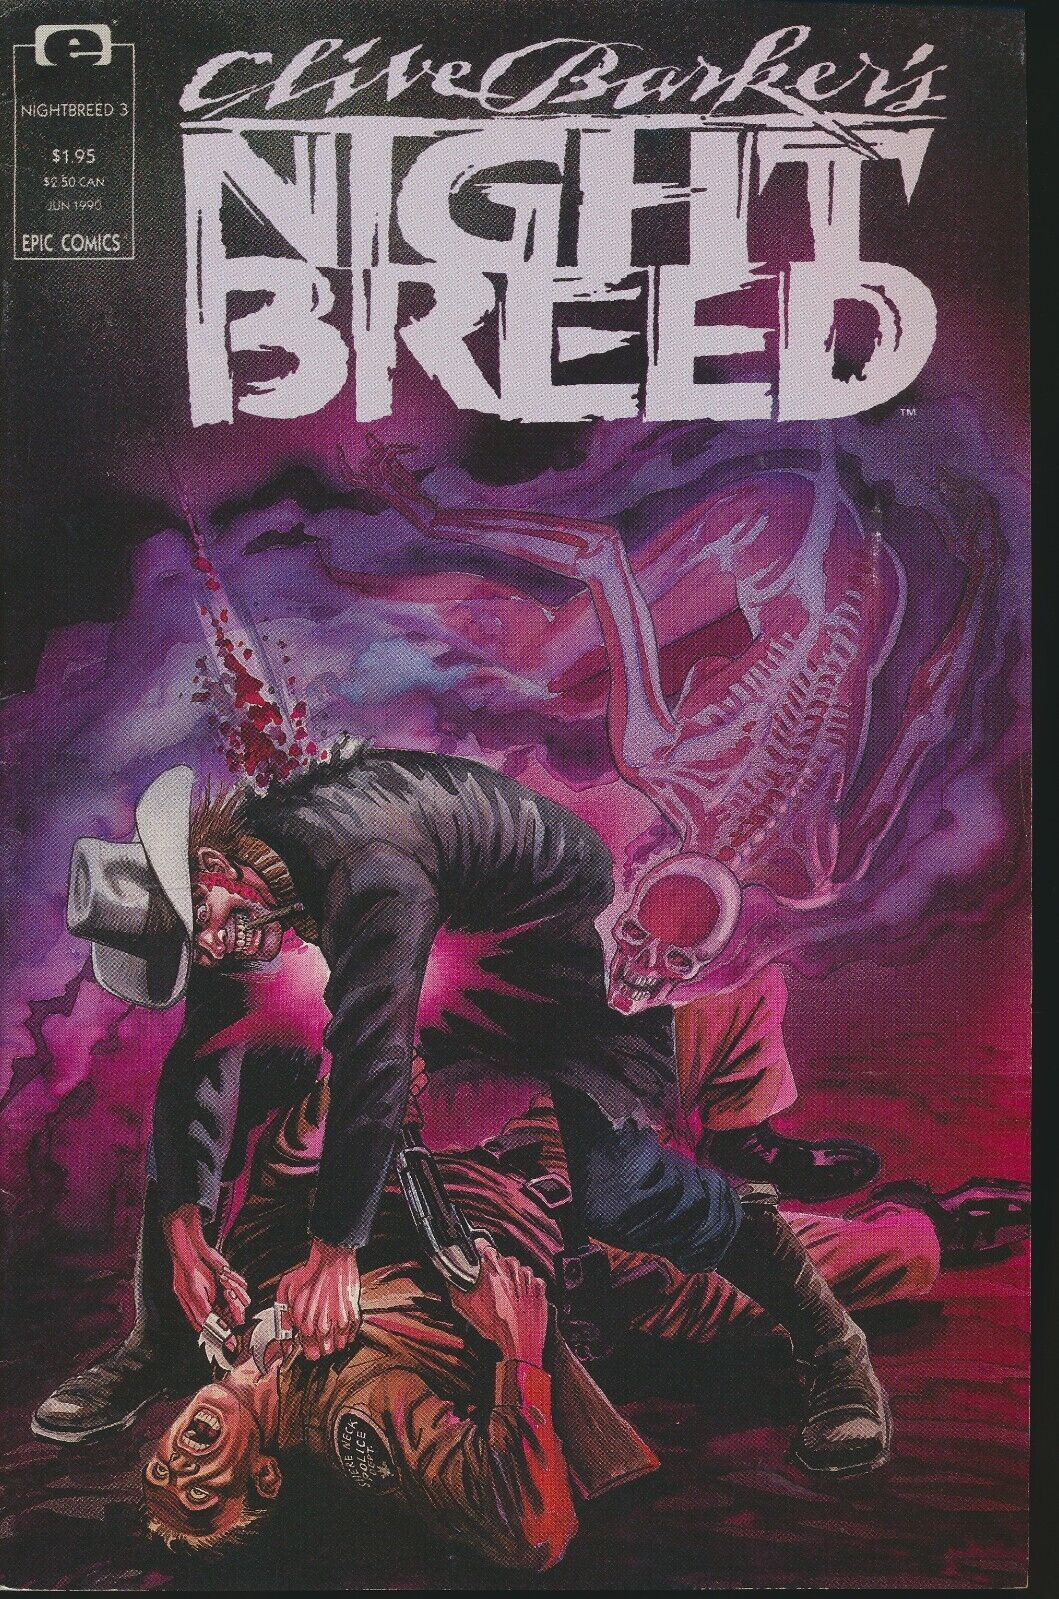 Clive Barker's "Night Breed" Epic Comics June 1990 Vol. 1 Issue 3